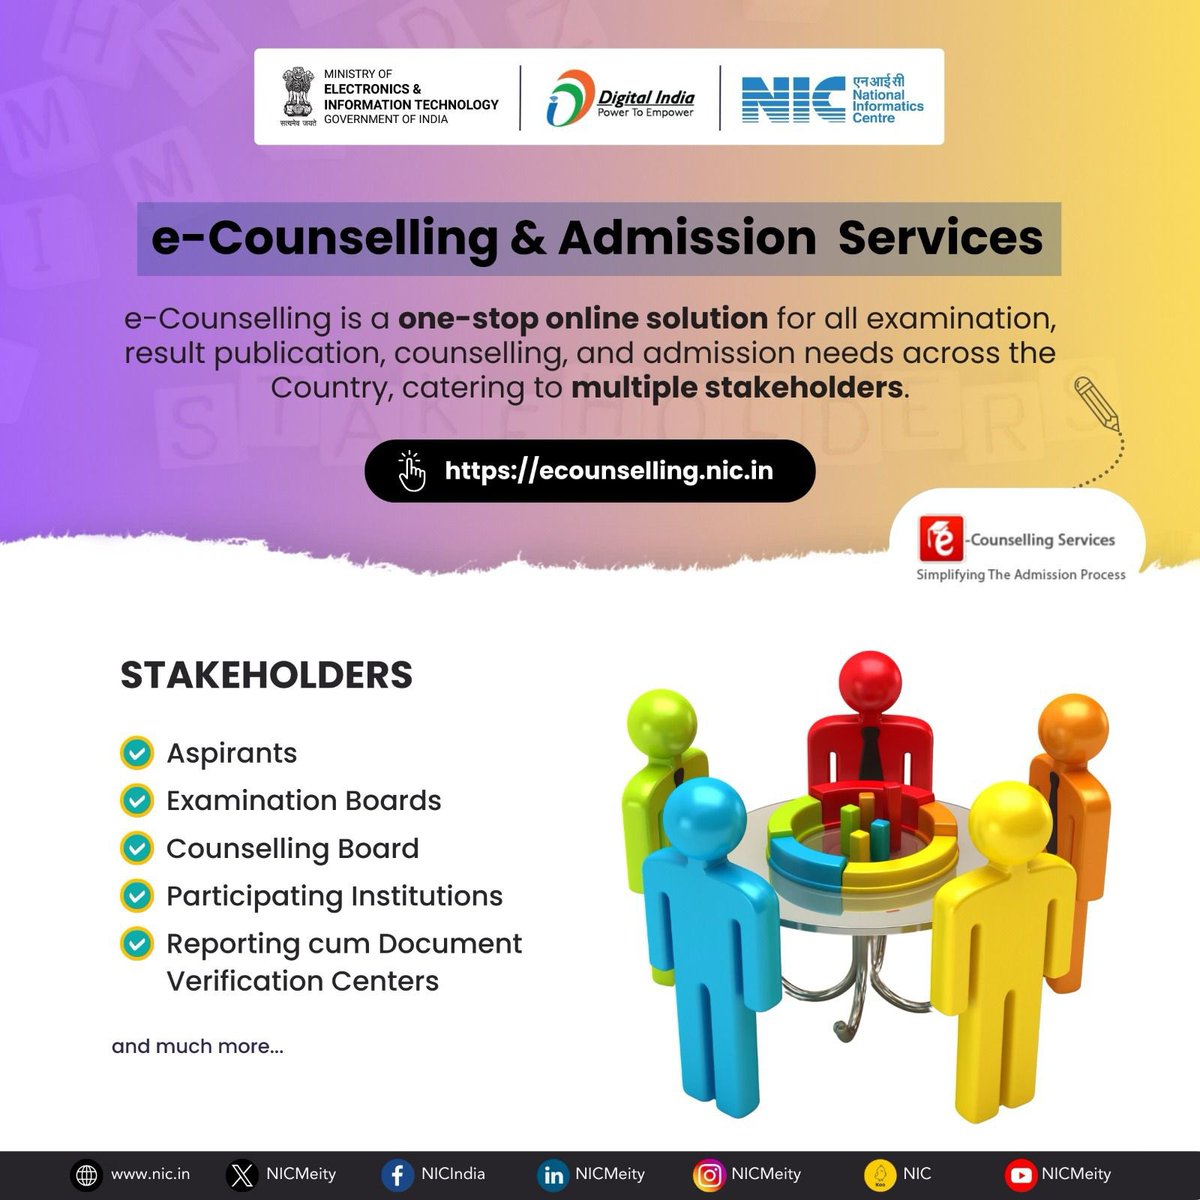 #eCounselling and #Admission Services by @NICMeity offer comprehensive support for a transparent and hassle-free admission process catering to multiple stakeholders like Aspirants, Examination Boards, Counselling Boards, etc. #NICMeitY #DigitalIndia #DigitalTransformation